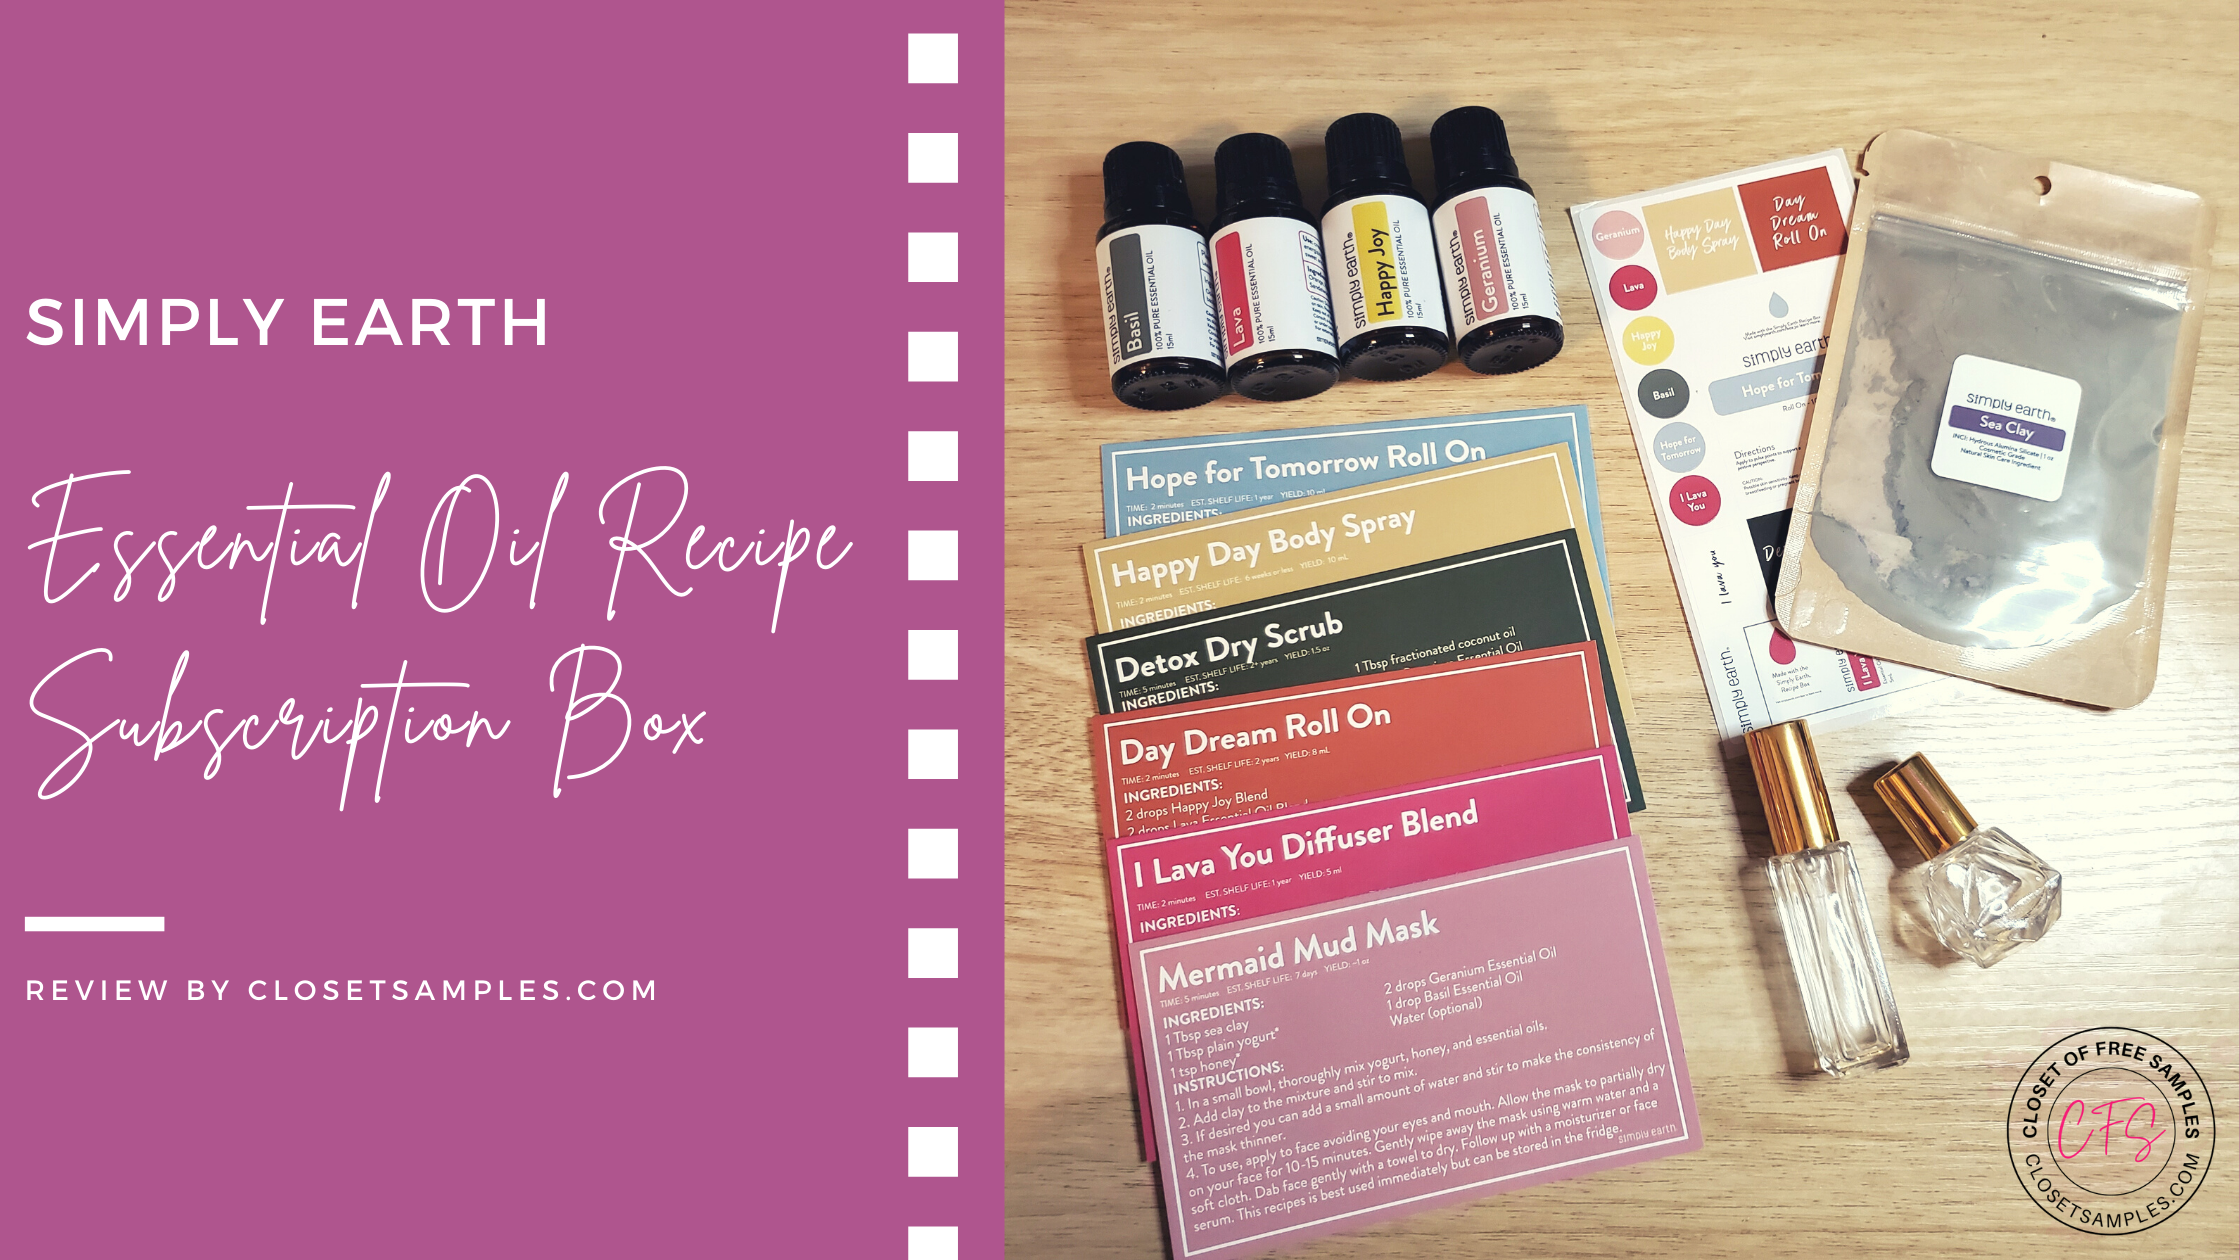 Simply-Earth-February-2021-Essential-Oil-Recipe-Subscription-Box-Review-closetsamples.png